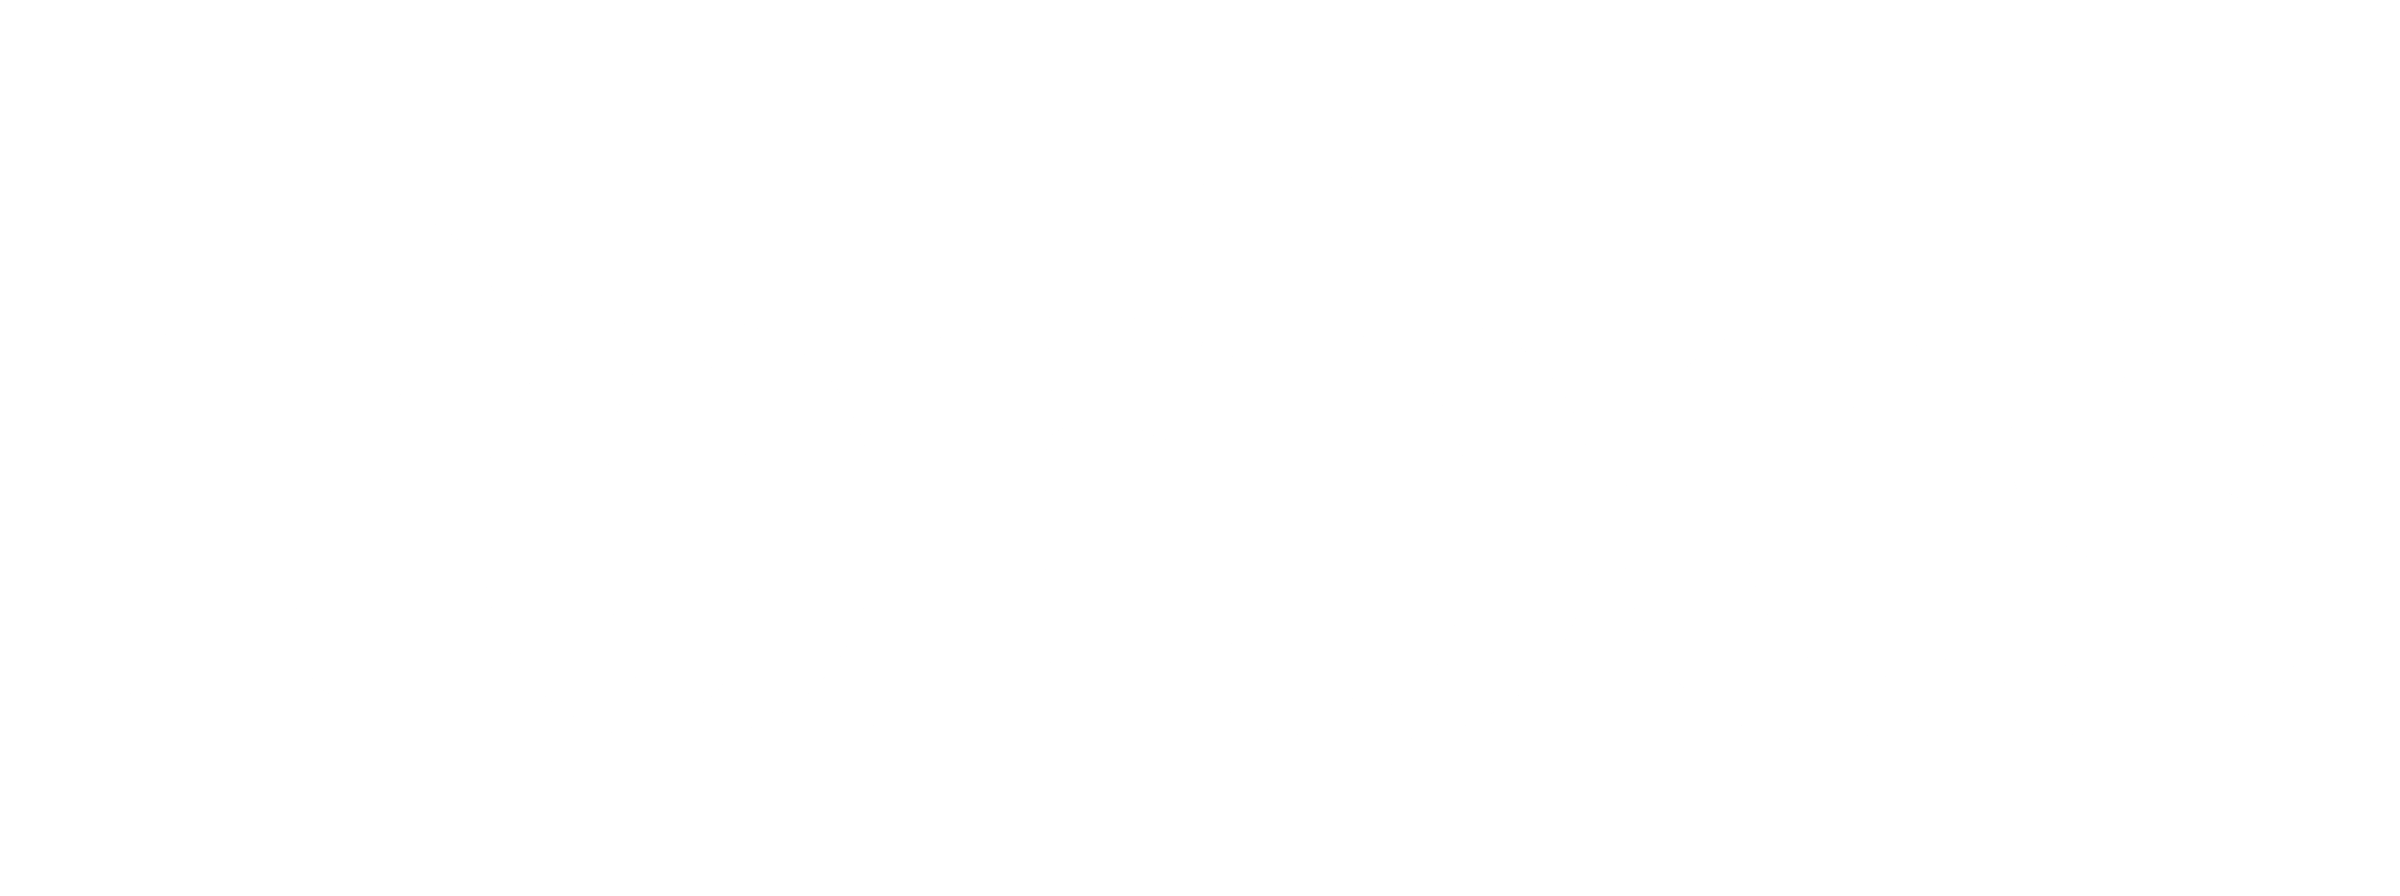 Forbes Logo PNG - 175676